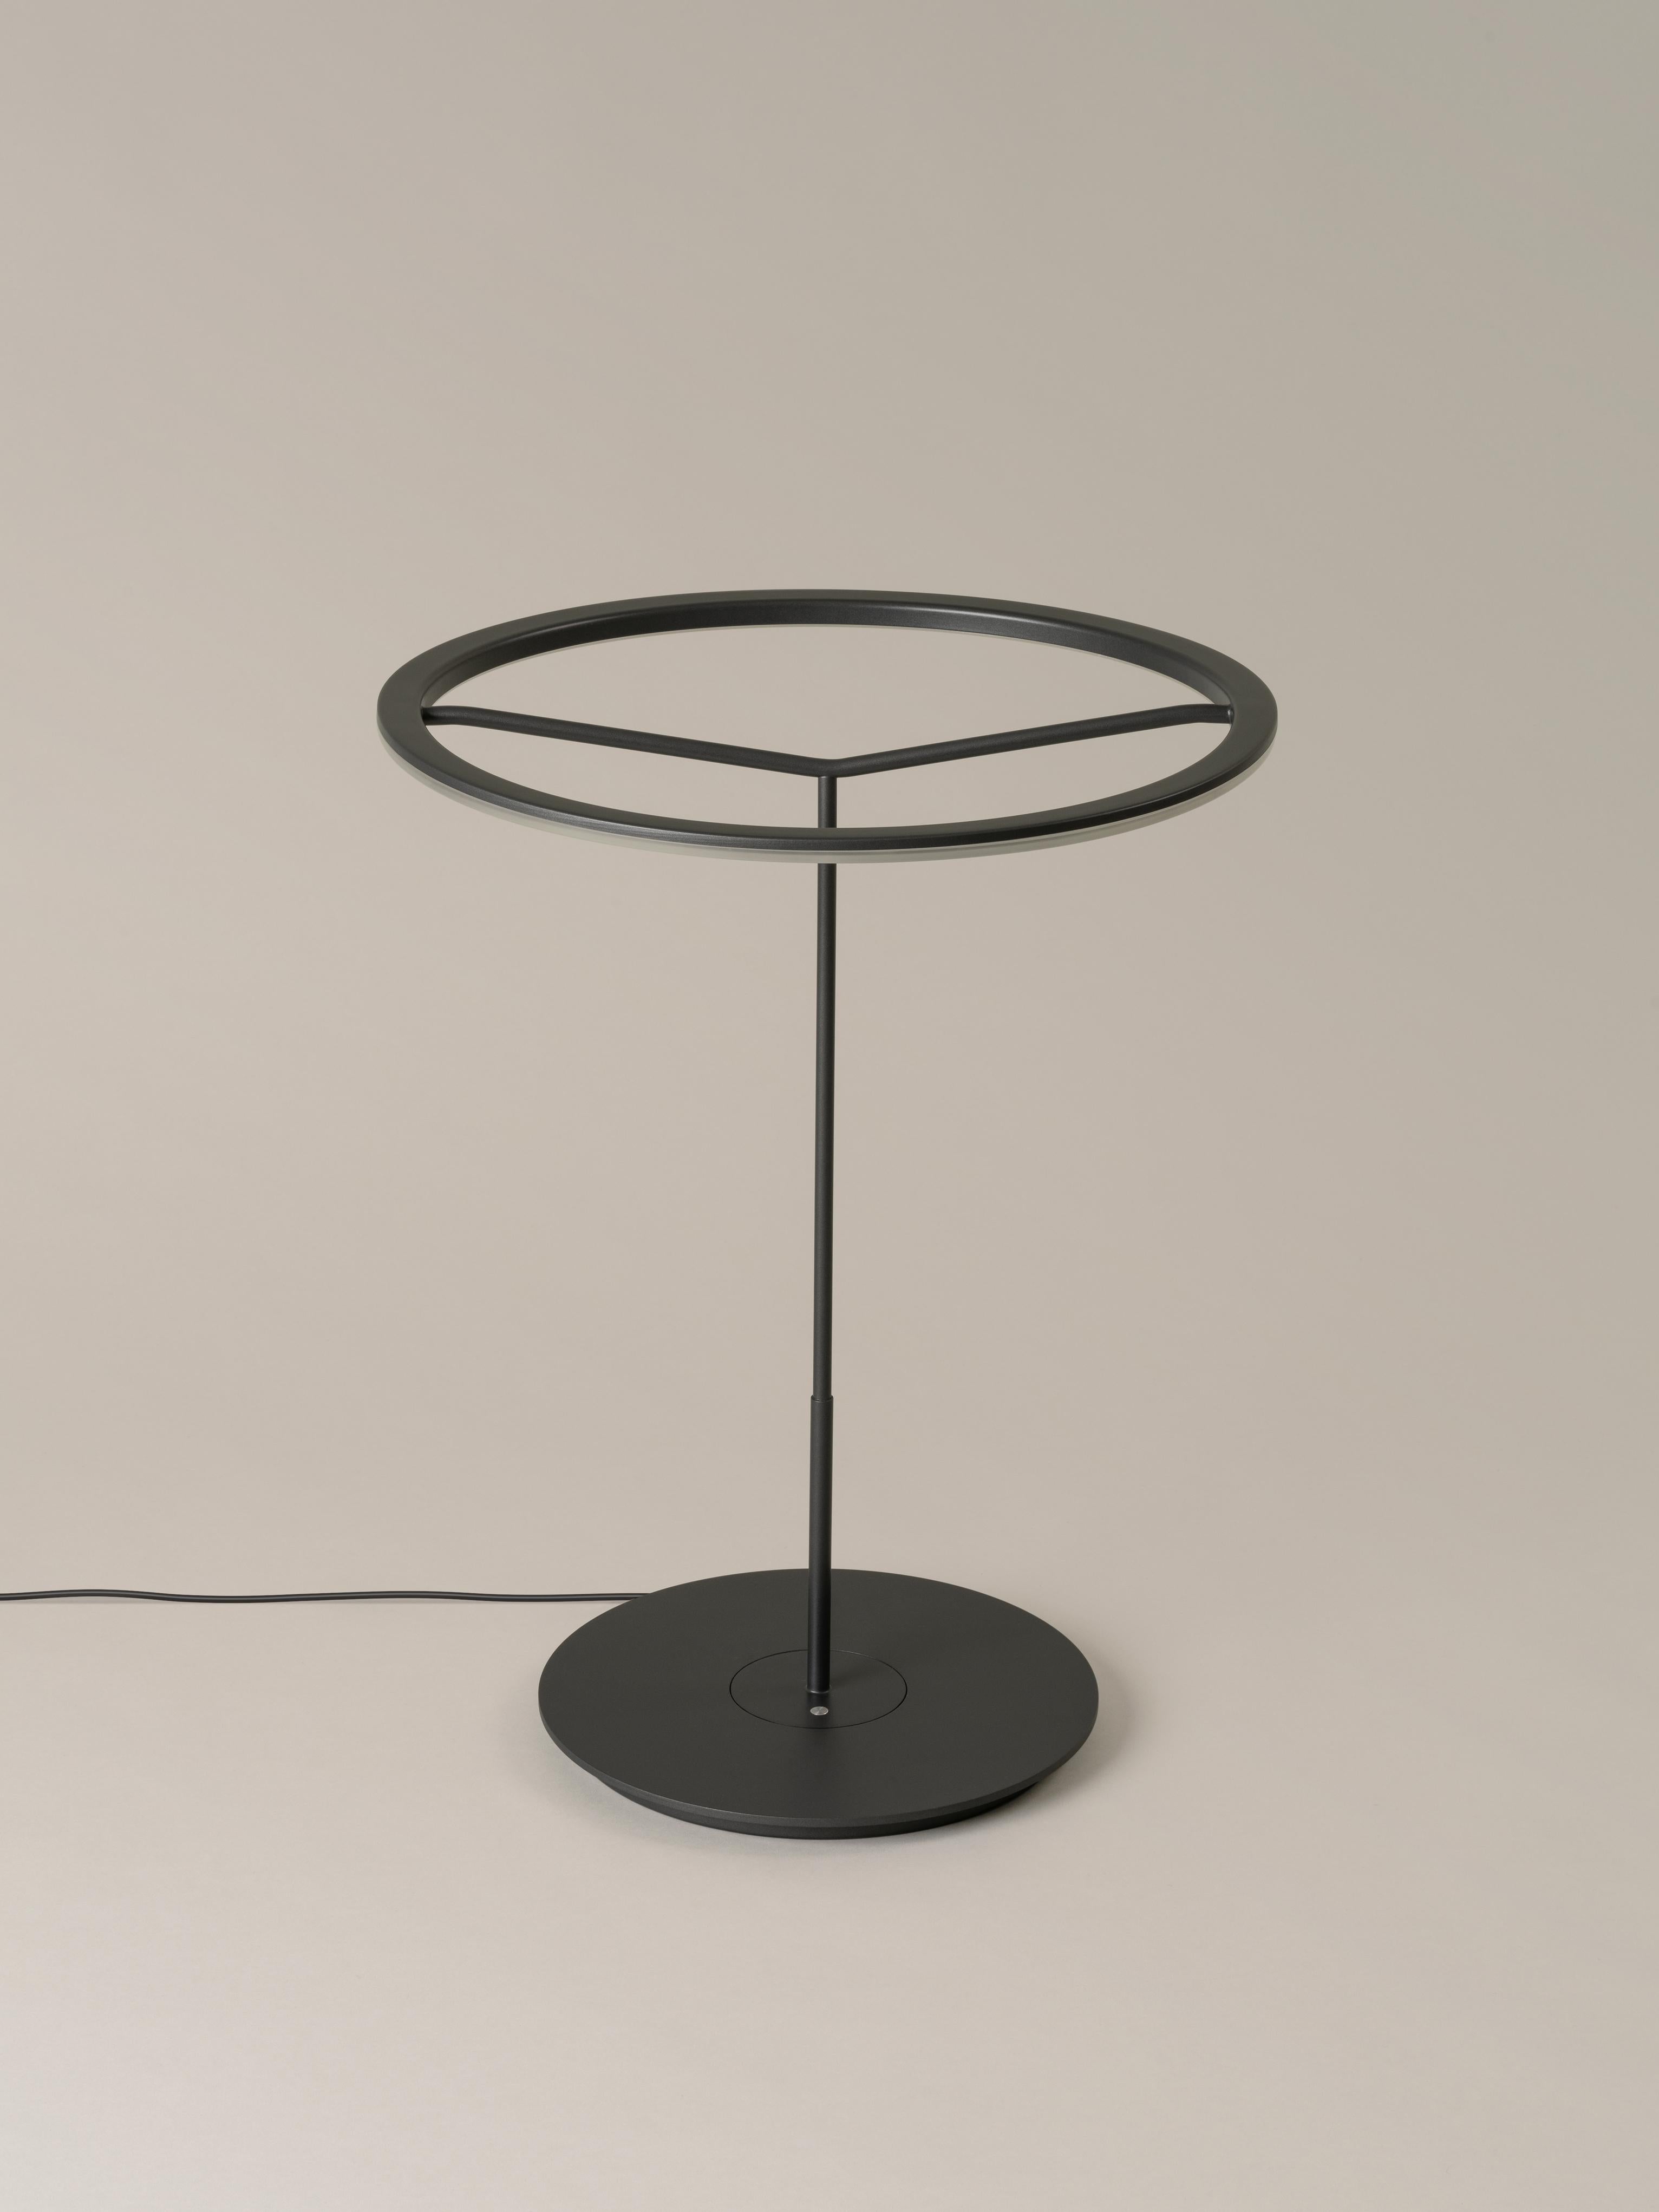 Large Graphite Sin table lamp by Antoni Arola
Dimensions: D 45 x H 58 cm
Materials: Metal.
Available in white or graphite, with or without shade.

A lamp that combines simplicity and technology to create a lucent ring of light suspended in the